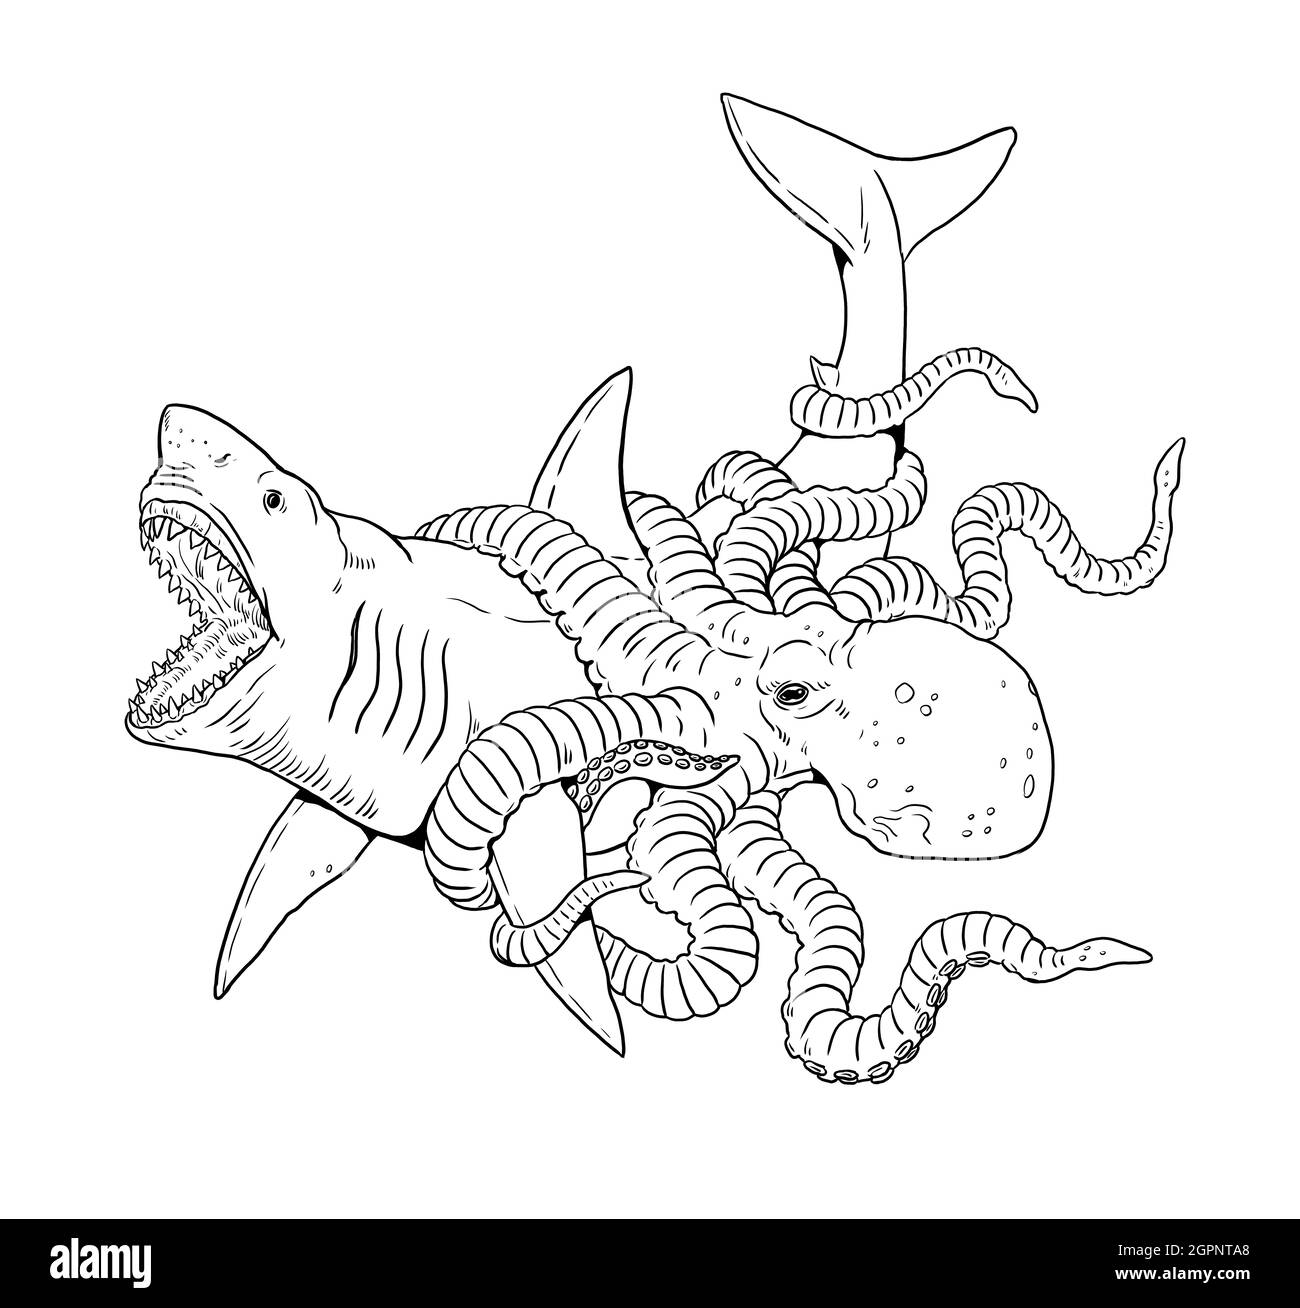 Giant octopus attacks a shark. Battle of the animals illustration. Template for coloring. Stock Photo